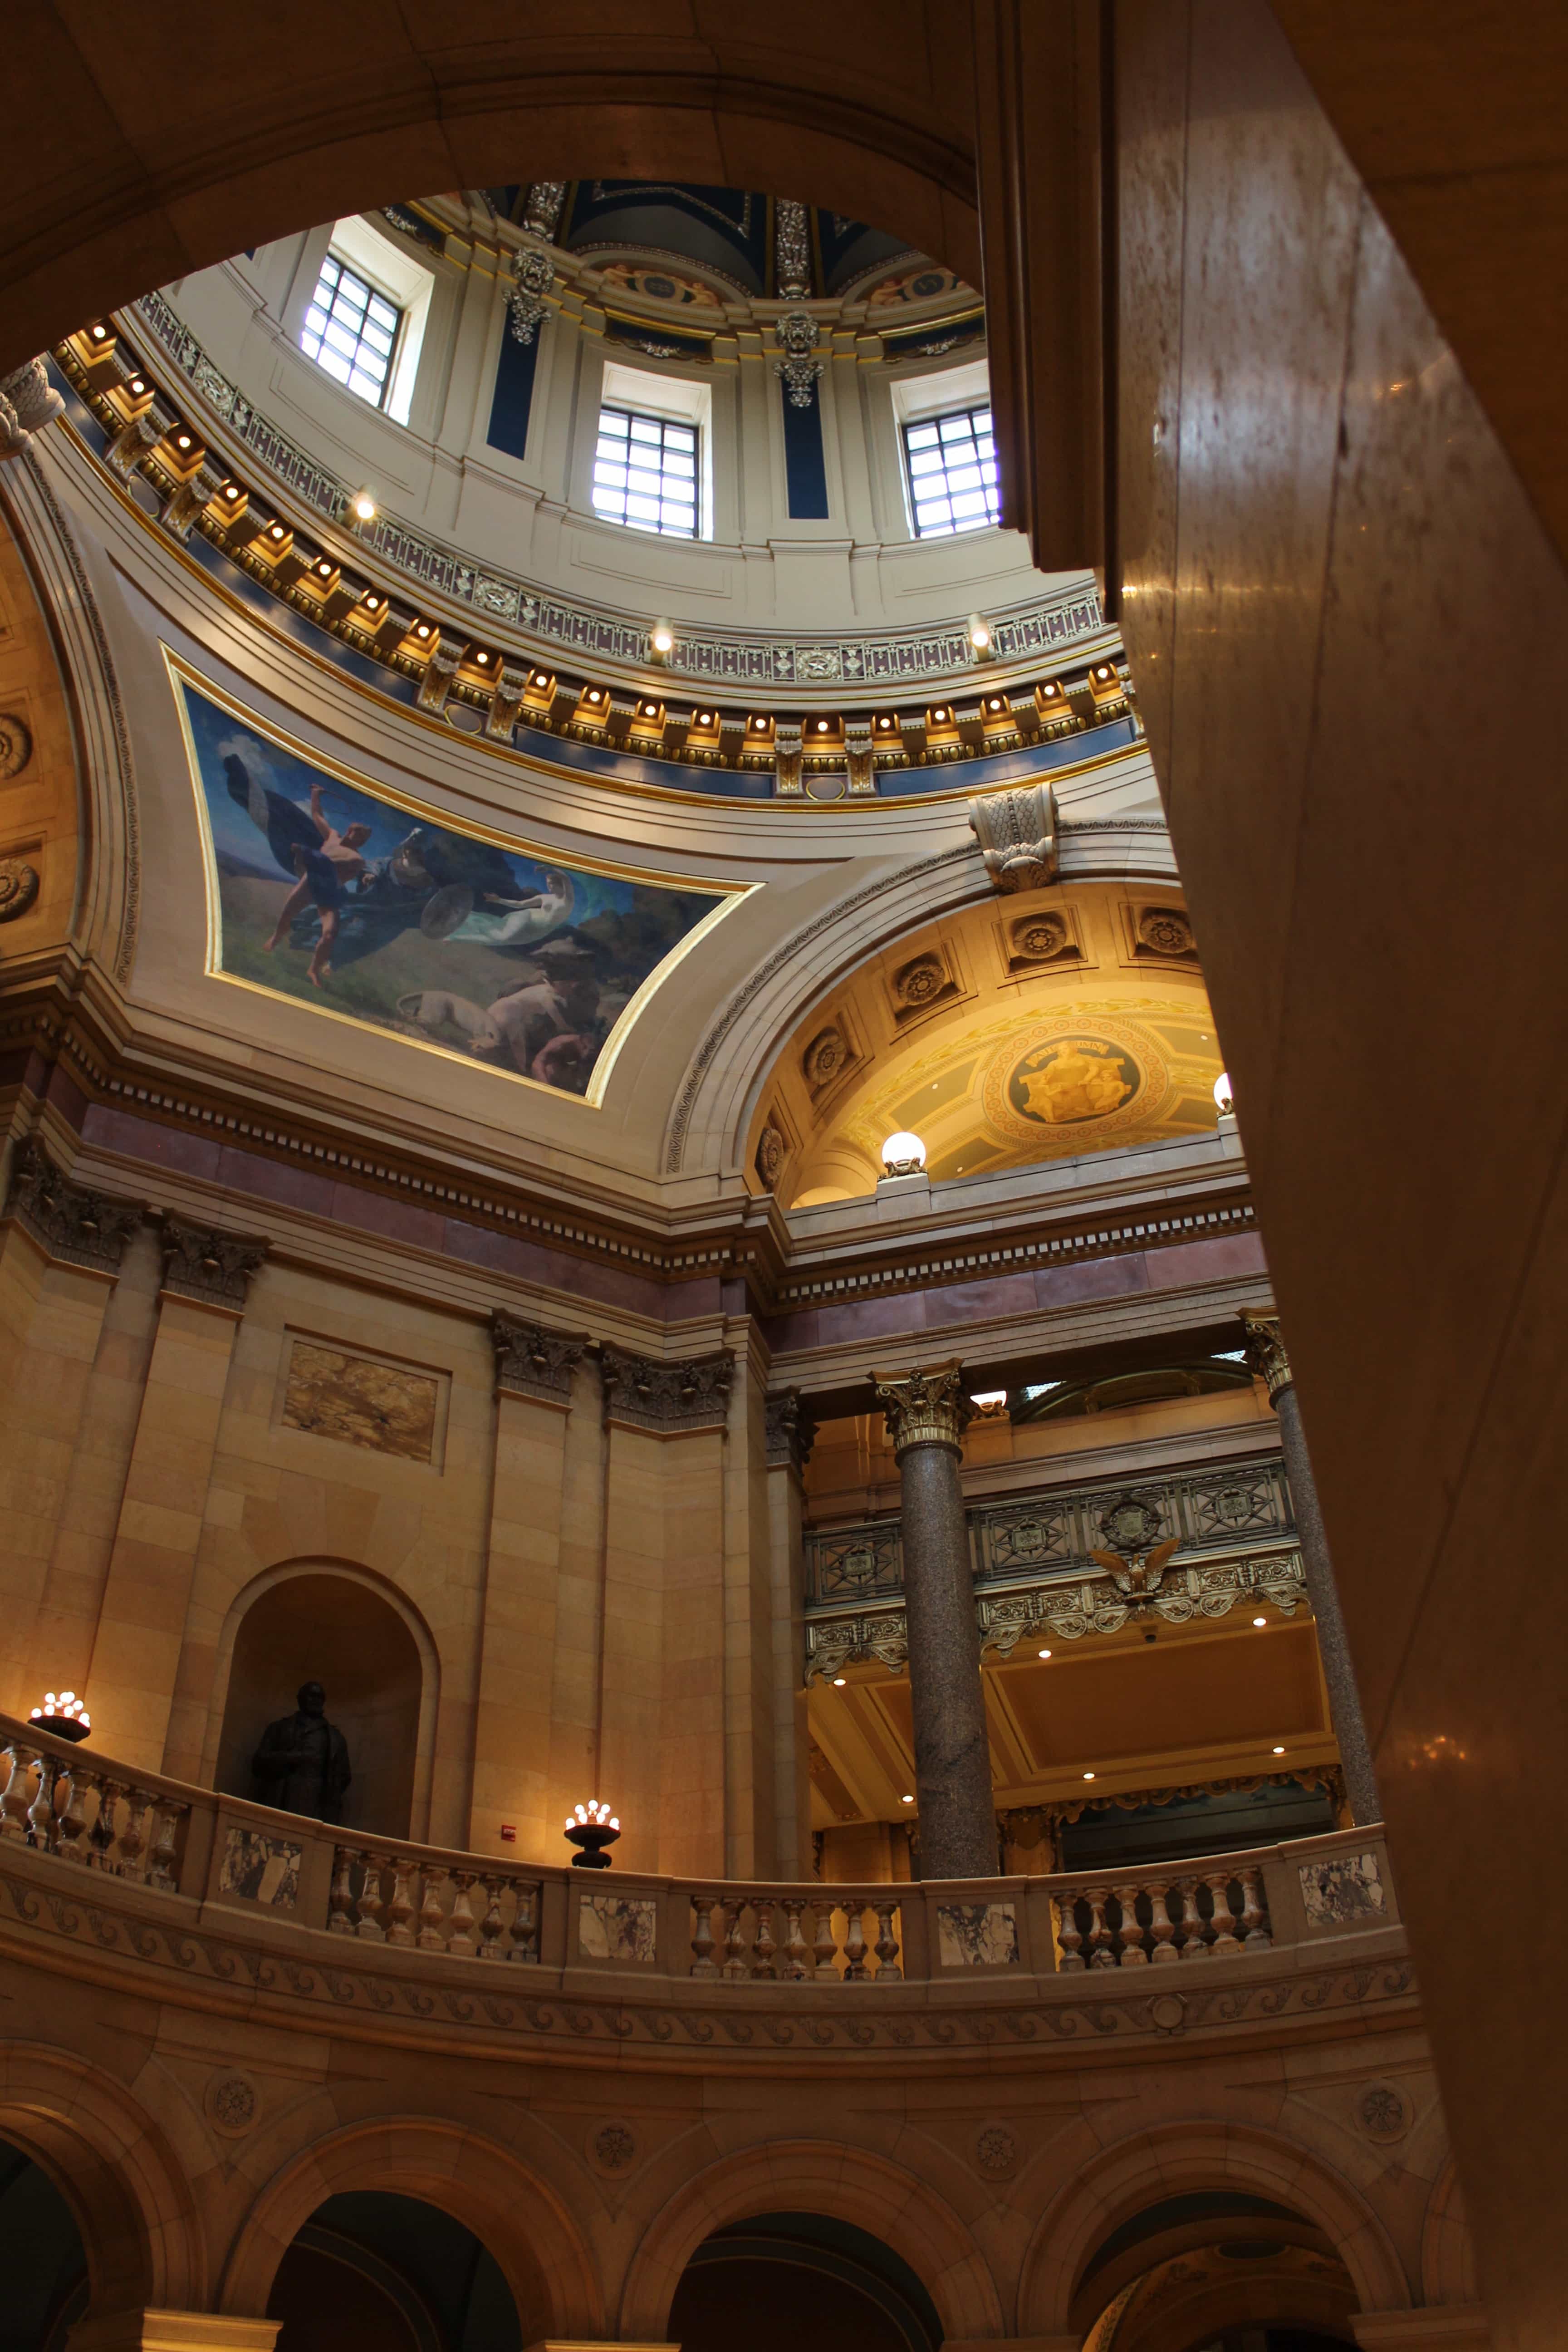 The Rotunda at the MN State Capitol